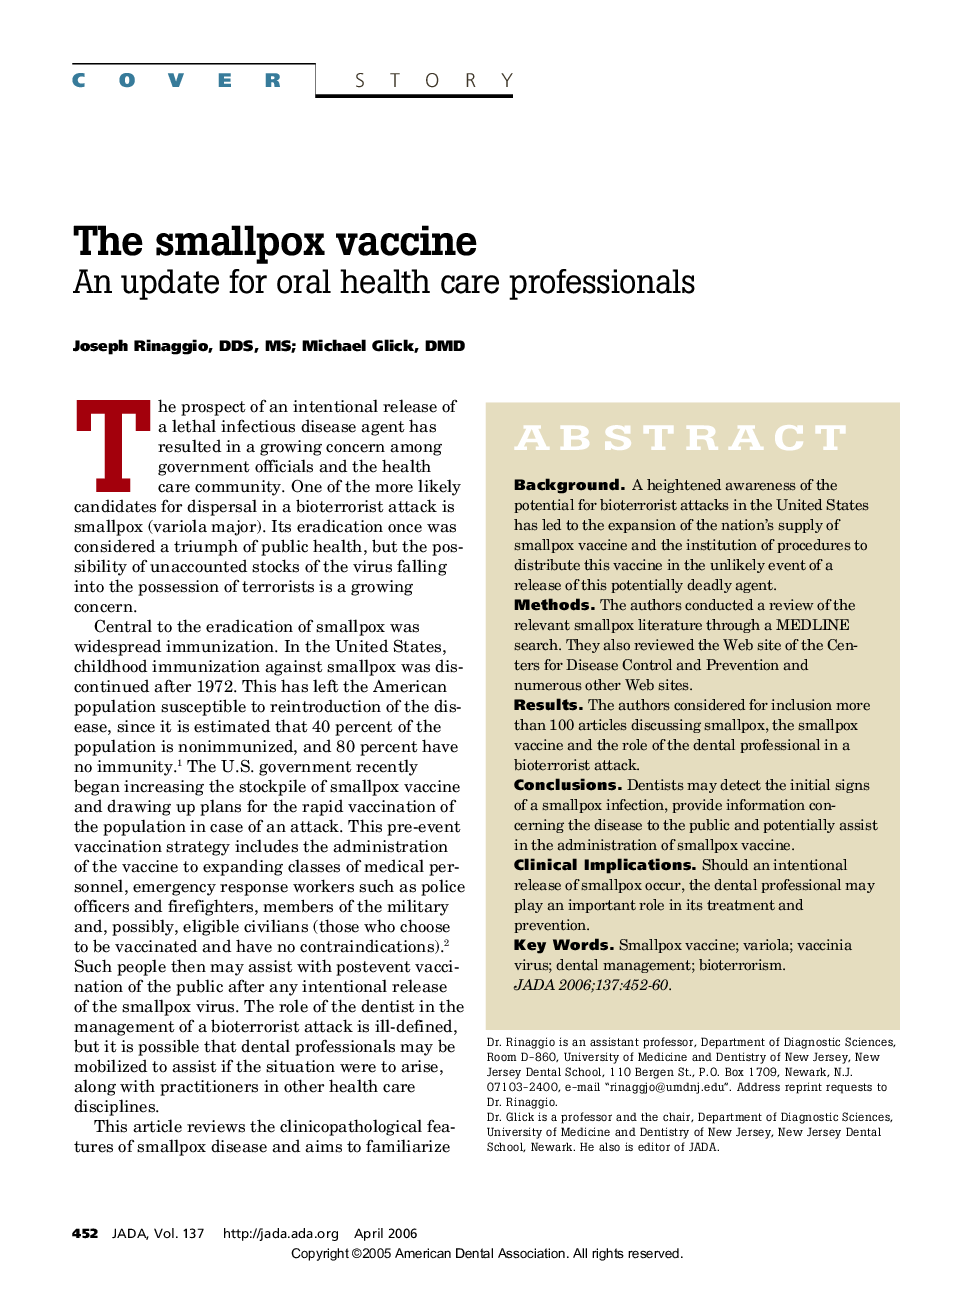 The smallpox vaccine: An update for oral health care professionals